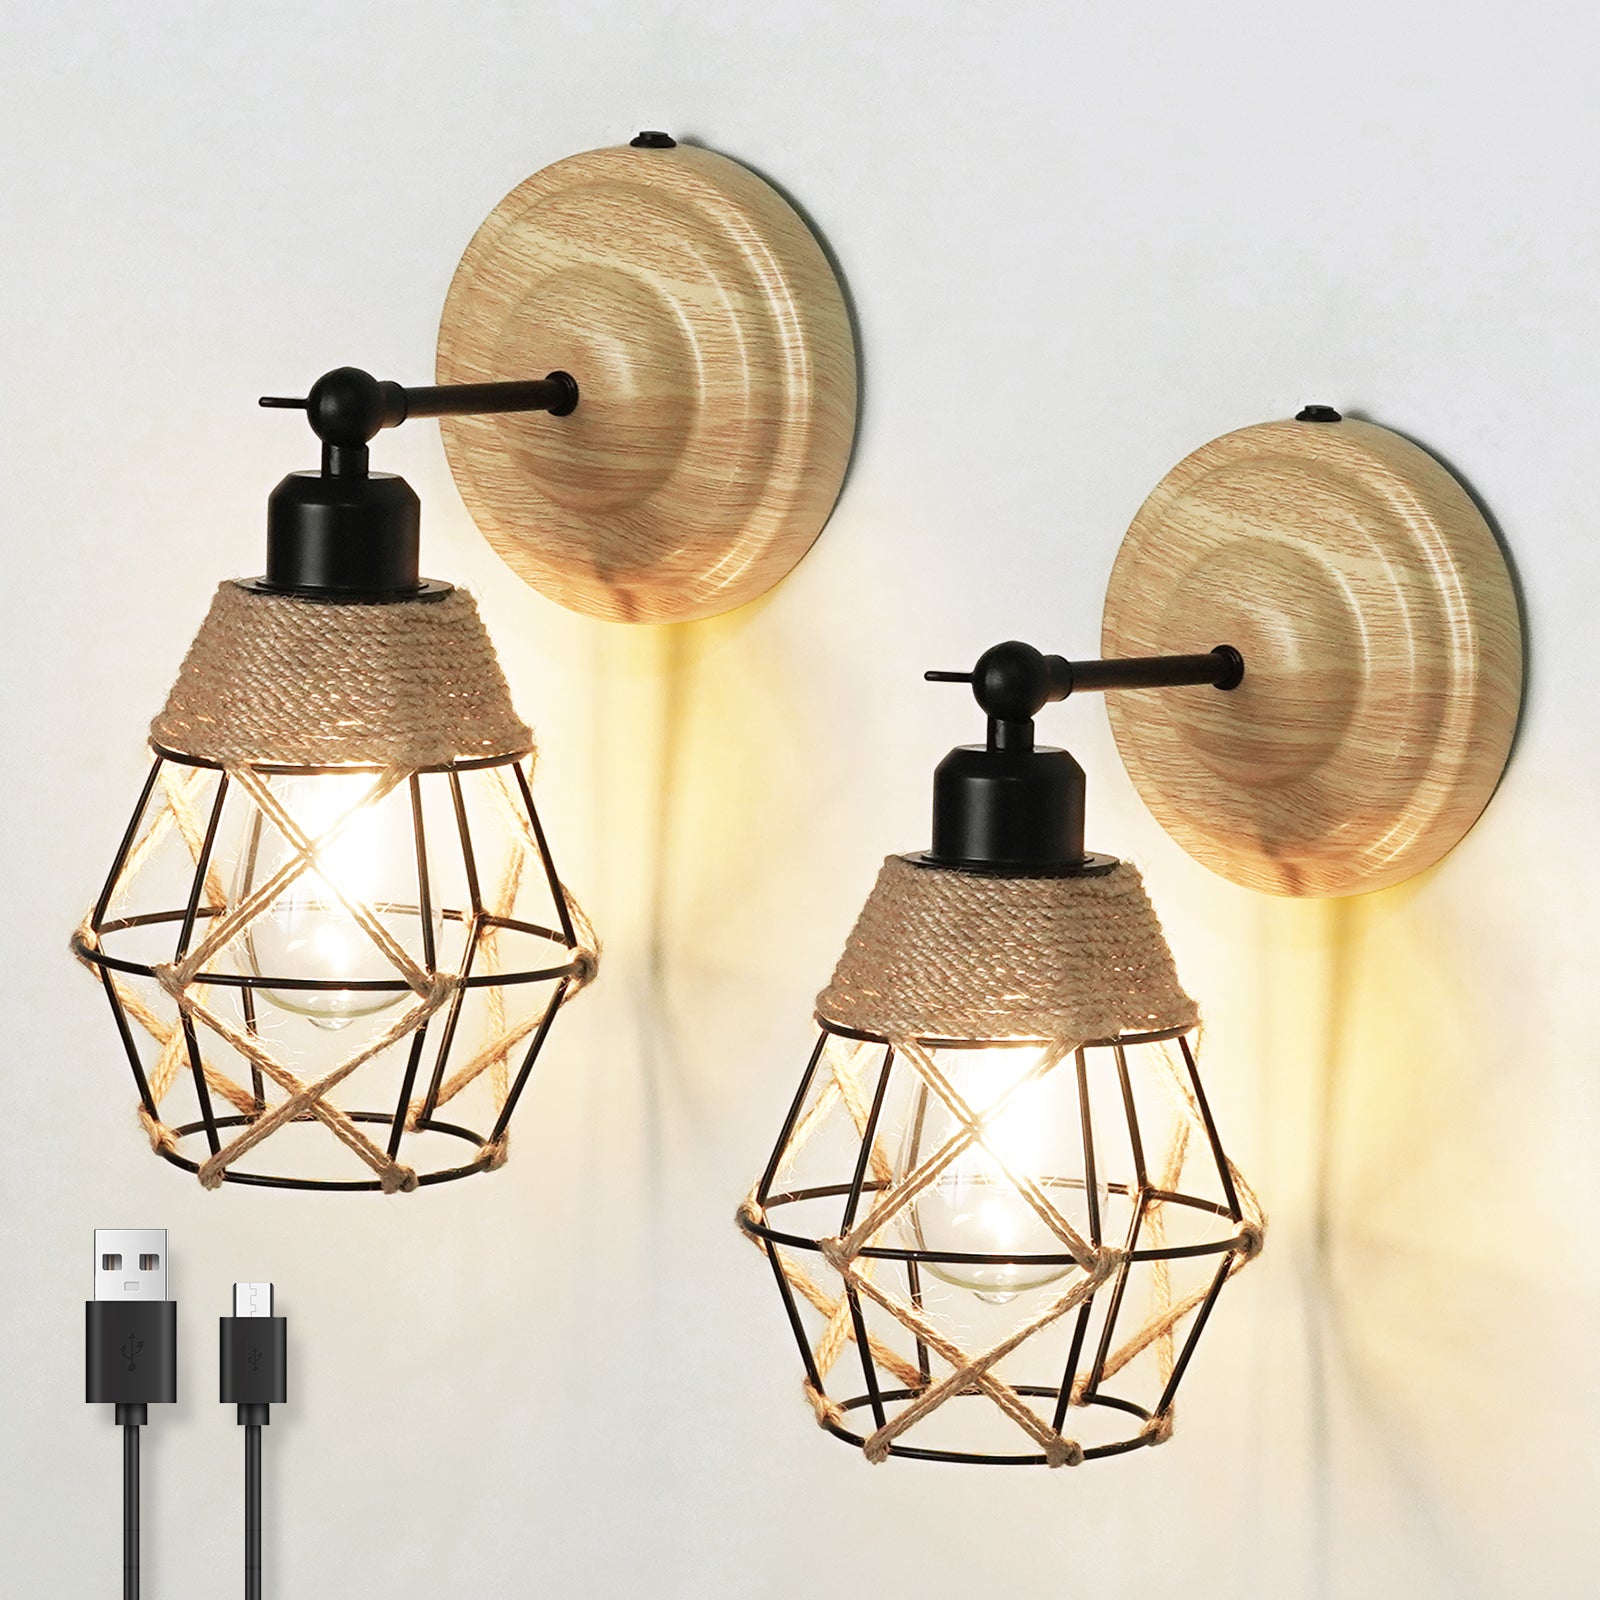 N06  Hemp Rope Iron Lampshade Battery Operated Wall Light for Living Room